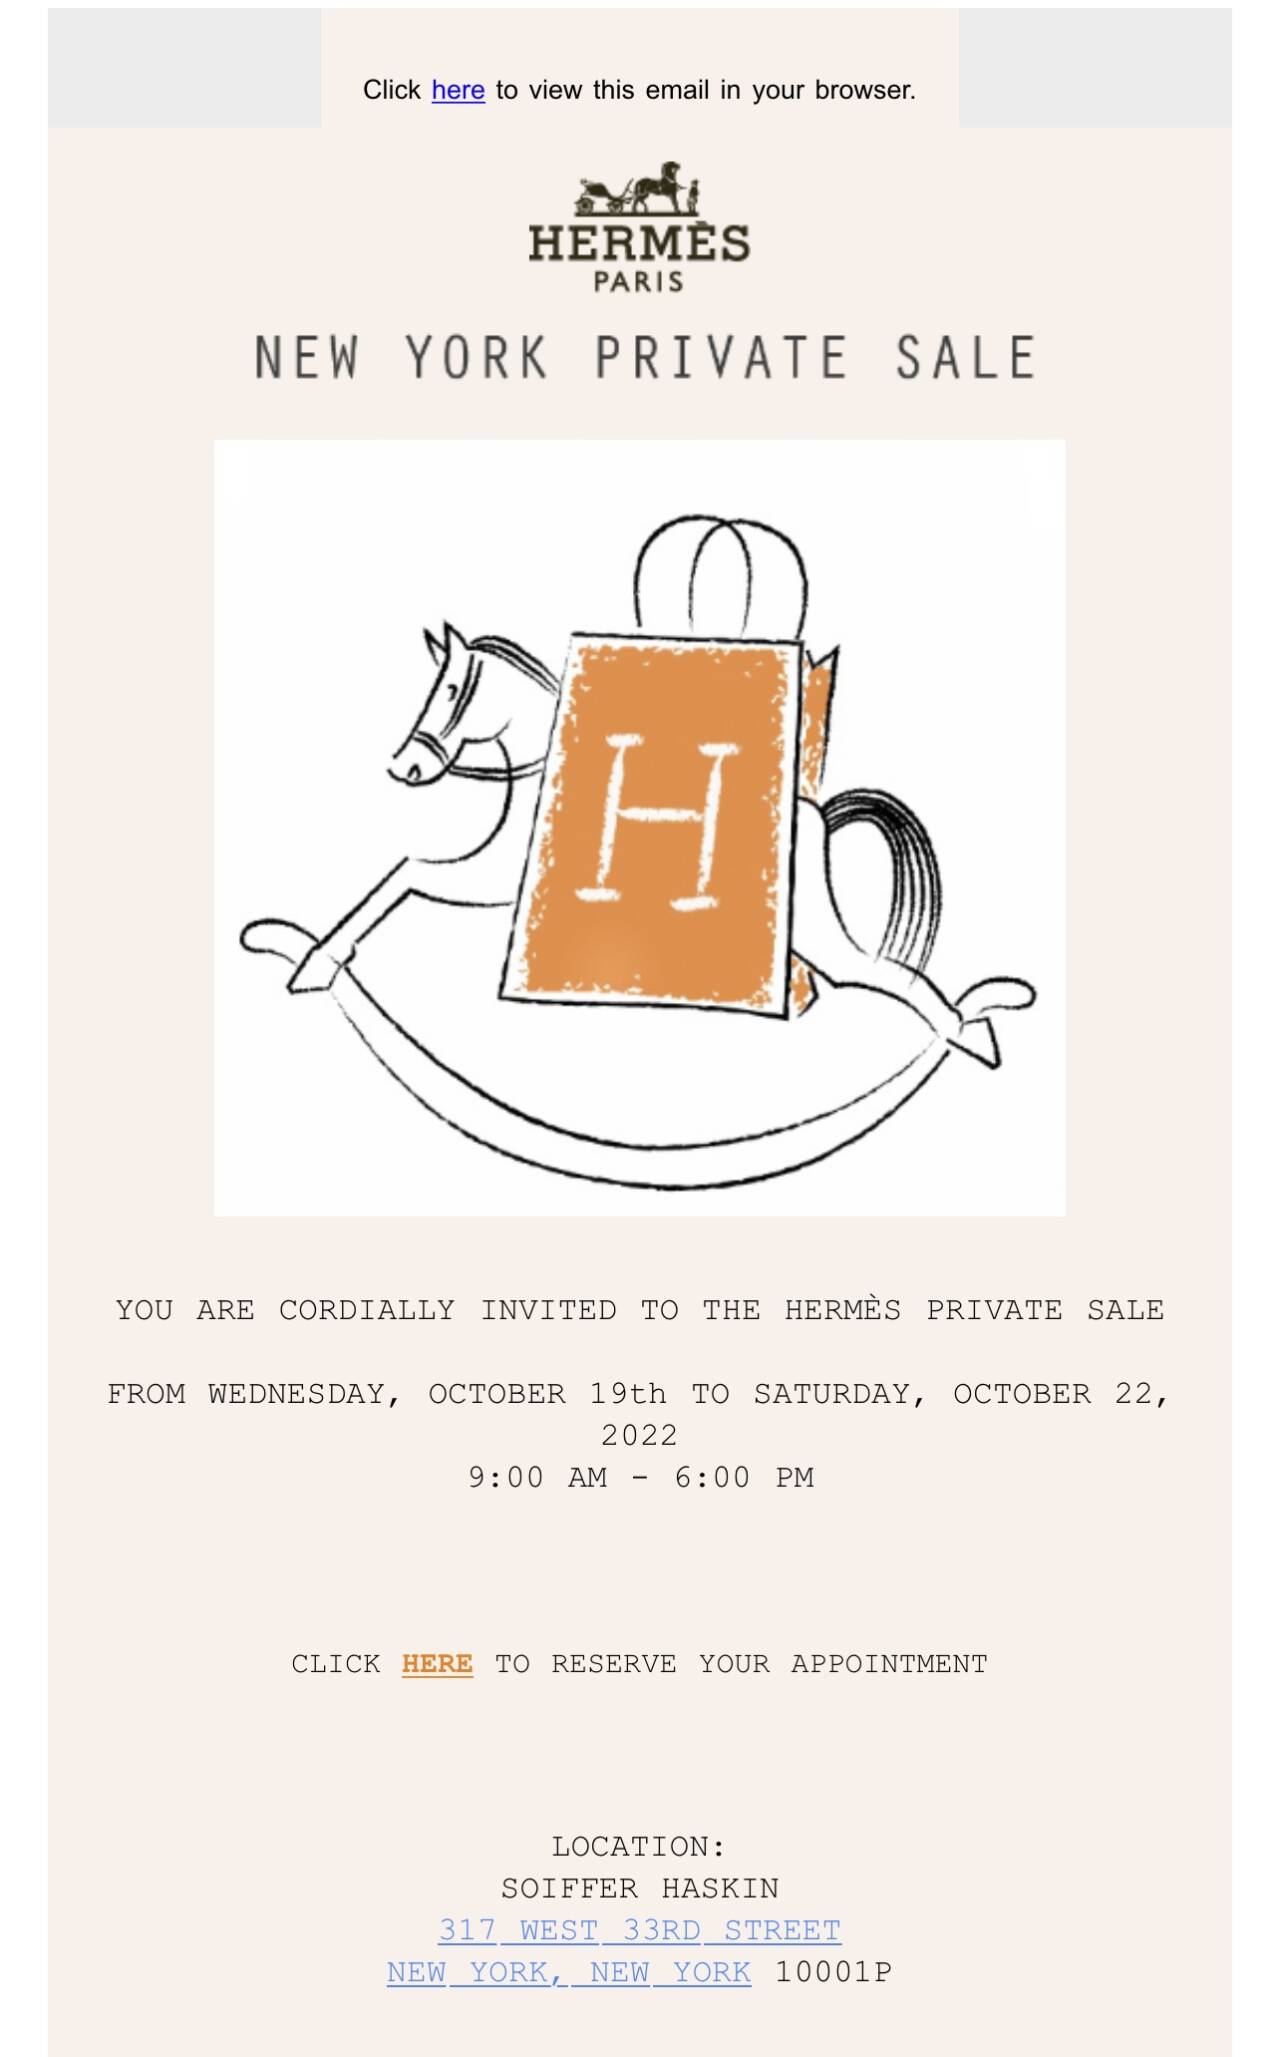 Hermes Accessories & Apparel New York Private Sample Sale